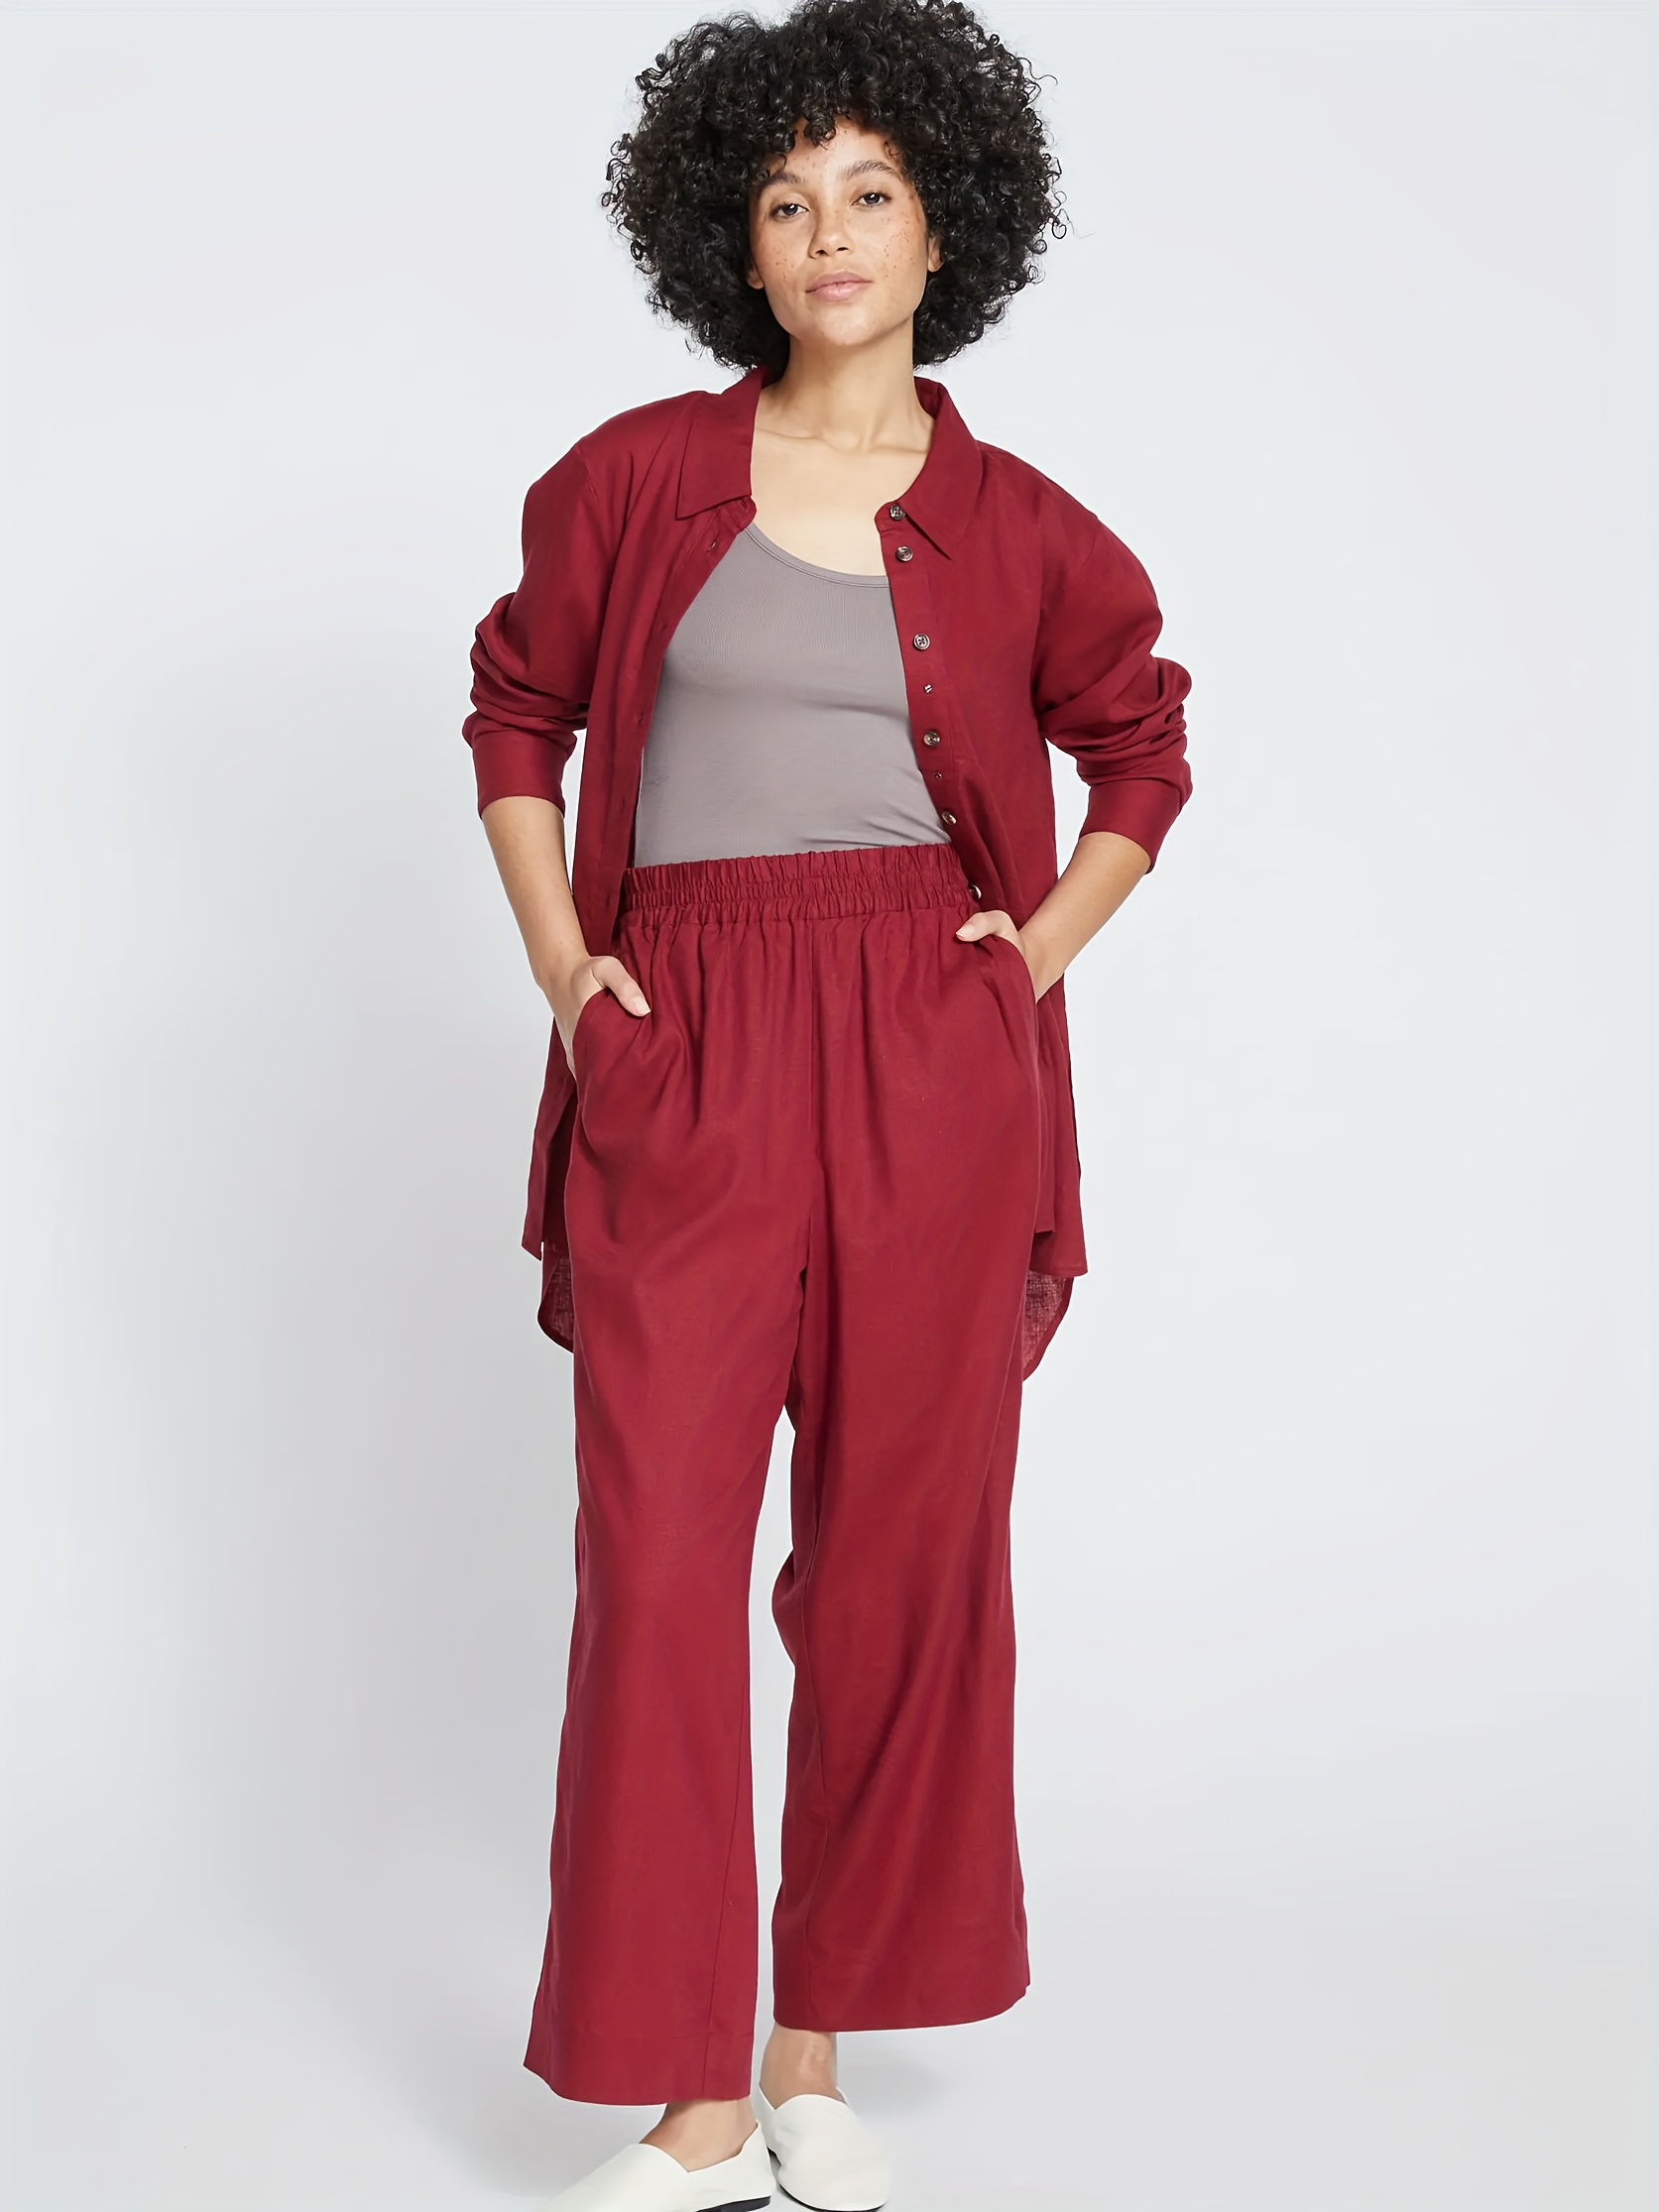 Plus Size Business Casual Pants, Women's Plus Solid Elastic High Rise  Medium Stretch Straight Leg Trousers With Pockets